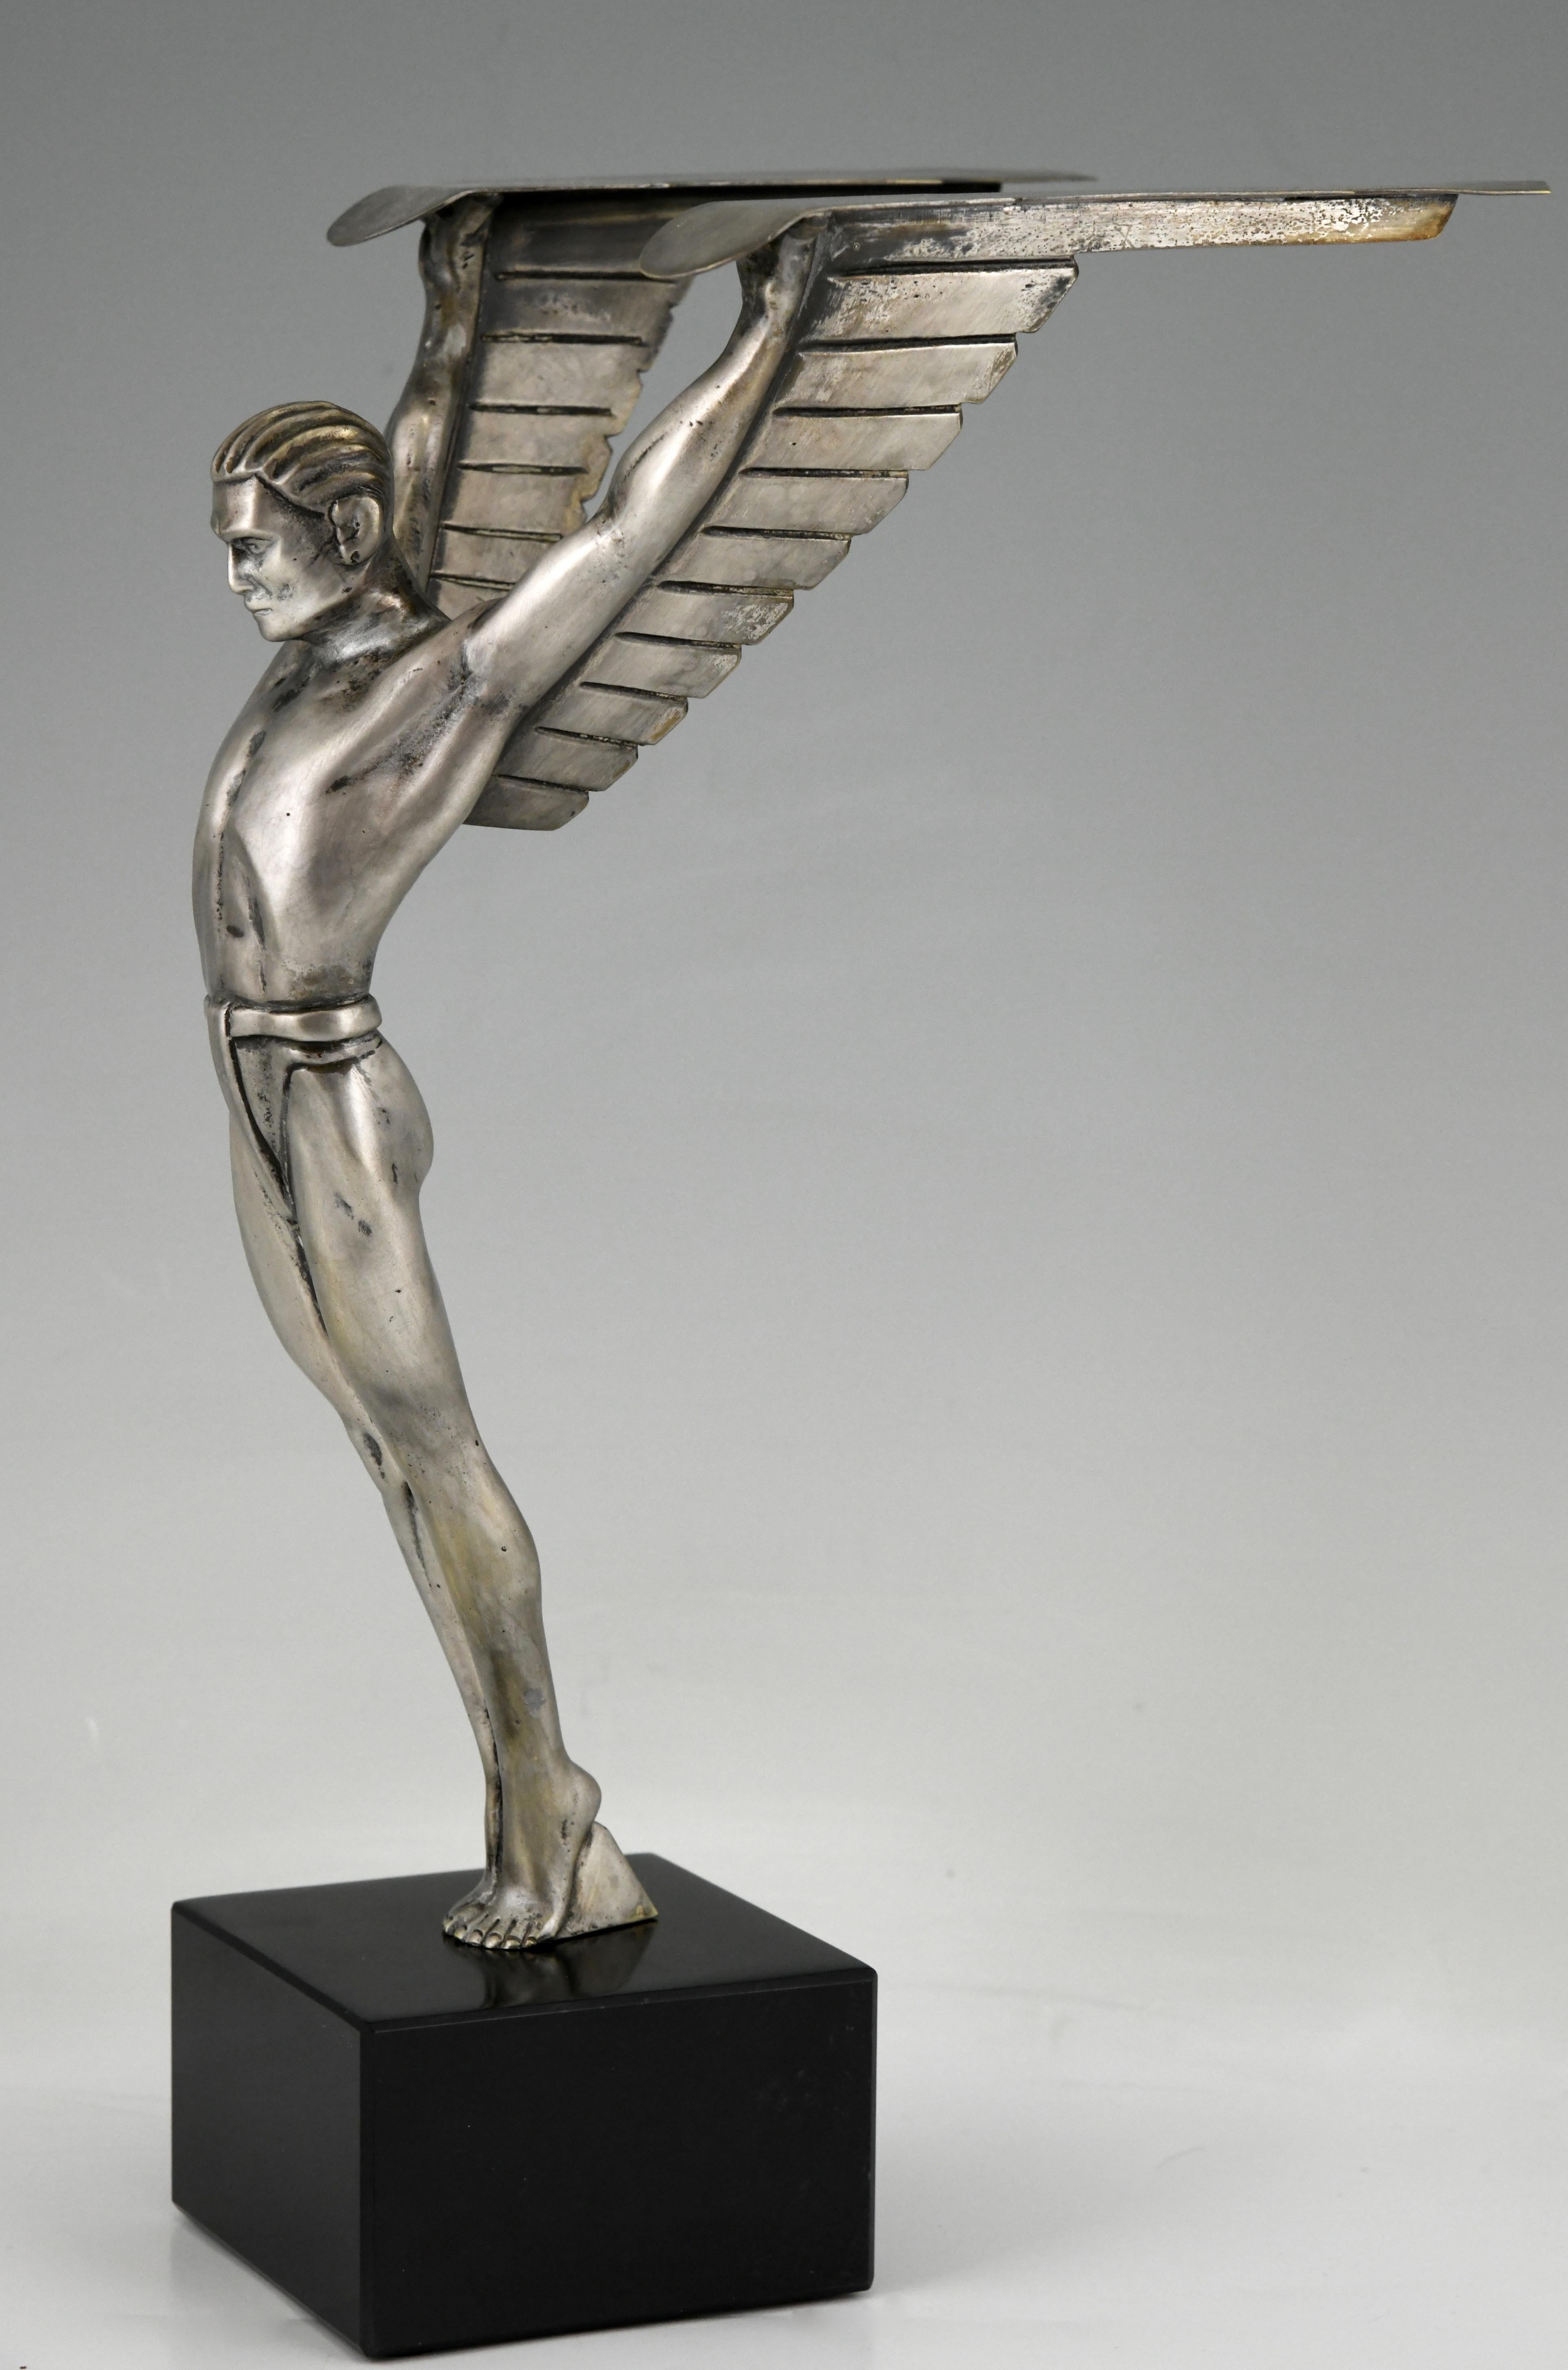 Silvered Icarus Art Deco Bronze Sculpture of a Winged Athlete Style of Schmidt Hofer